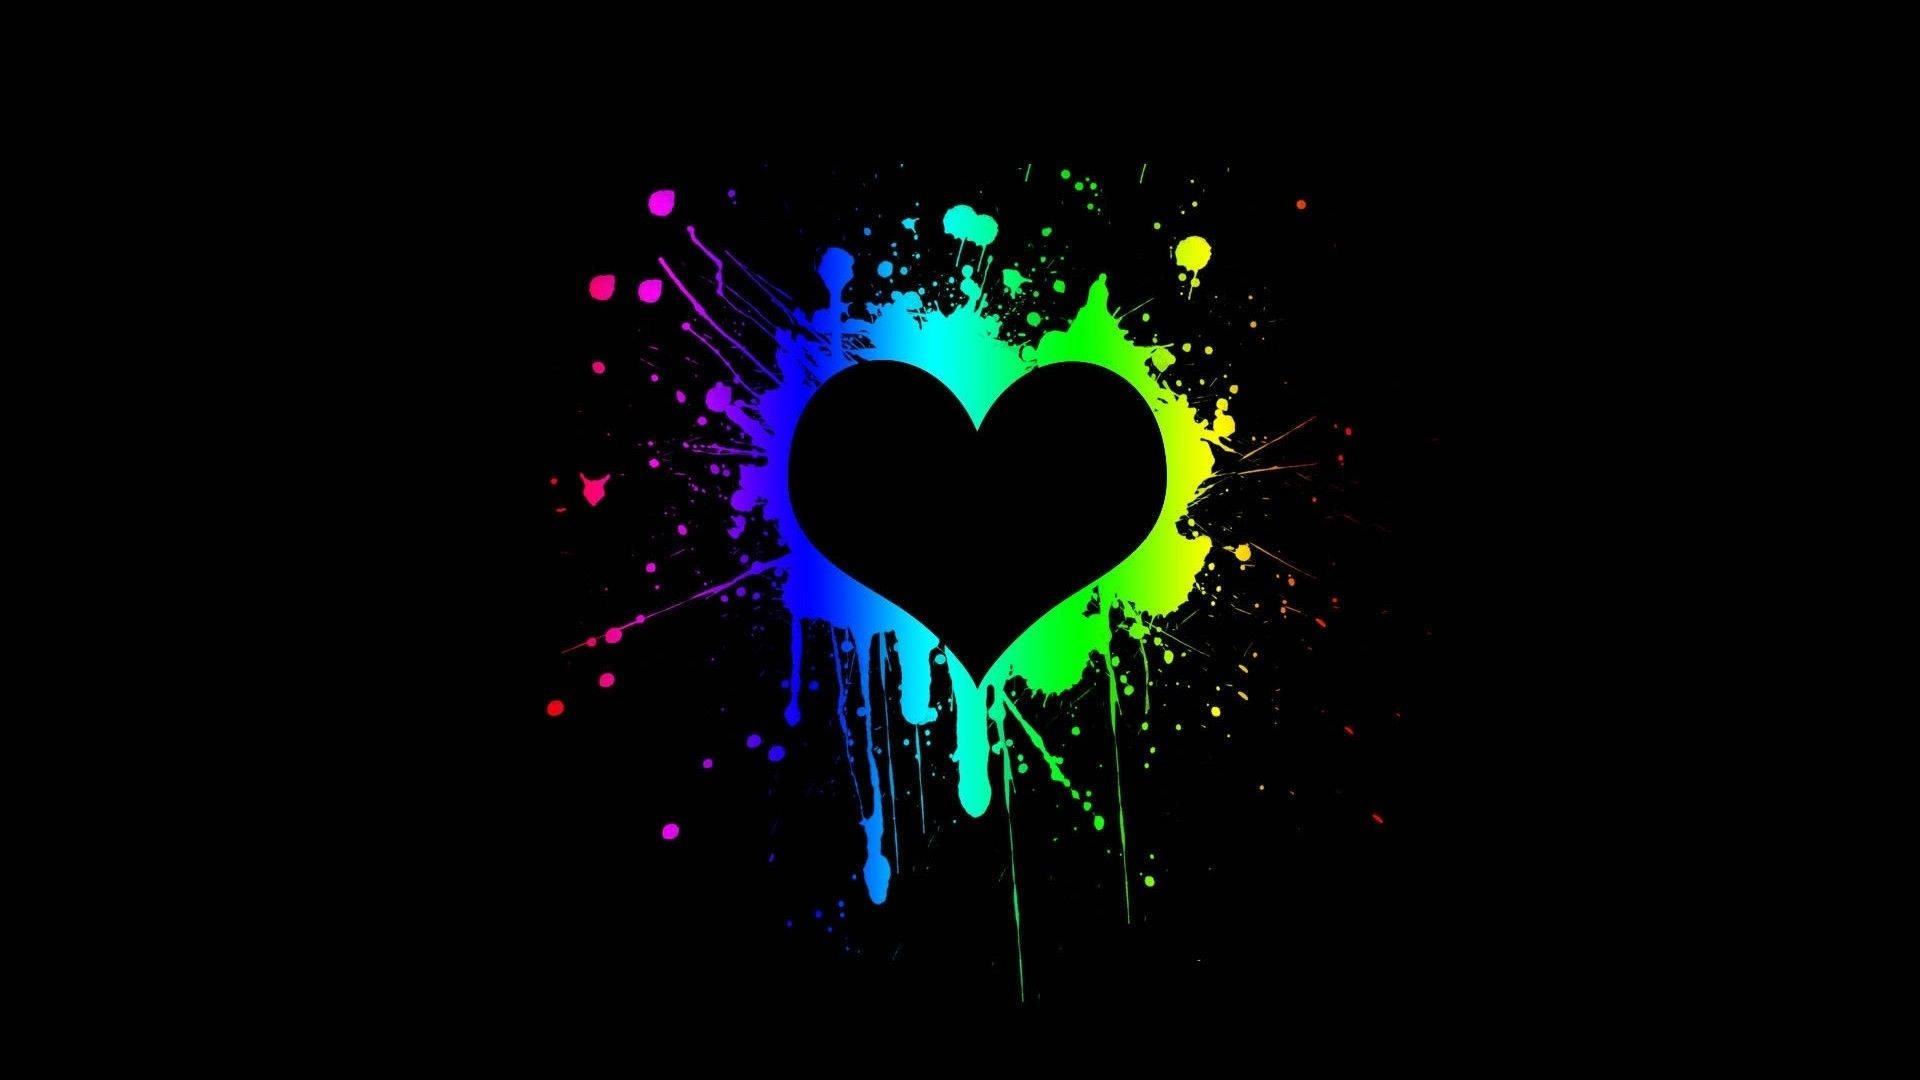 Mysterious Black Heart Imprinted With Paint Splashes